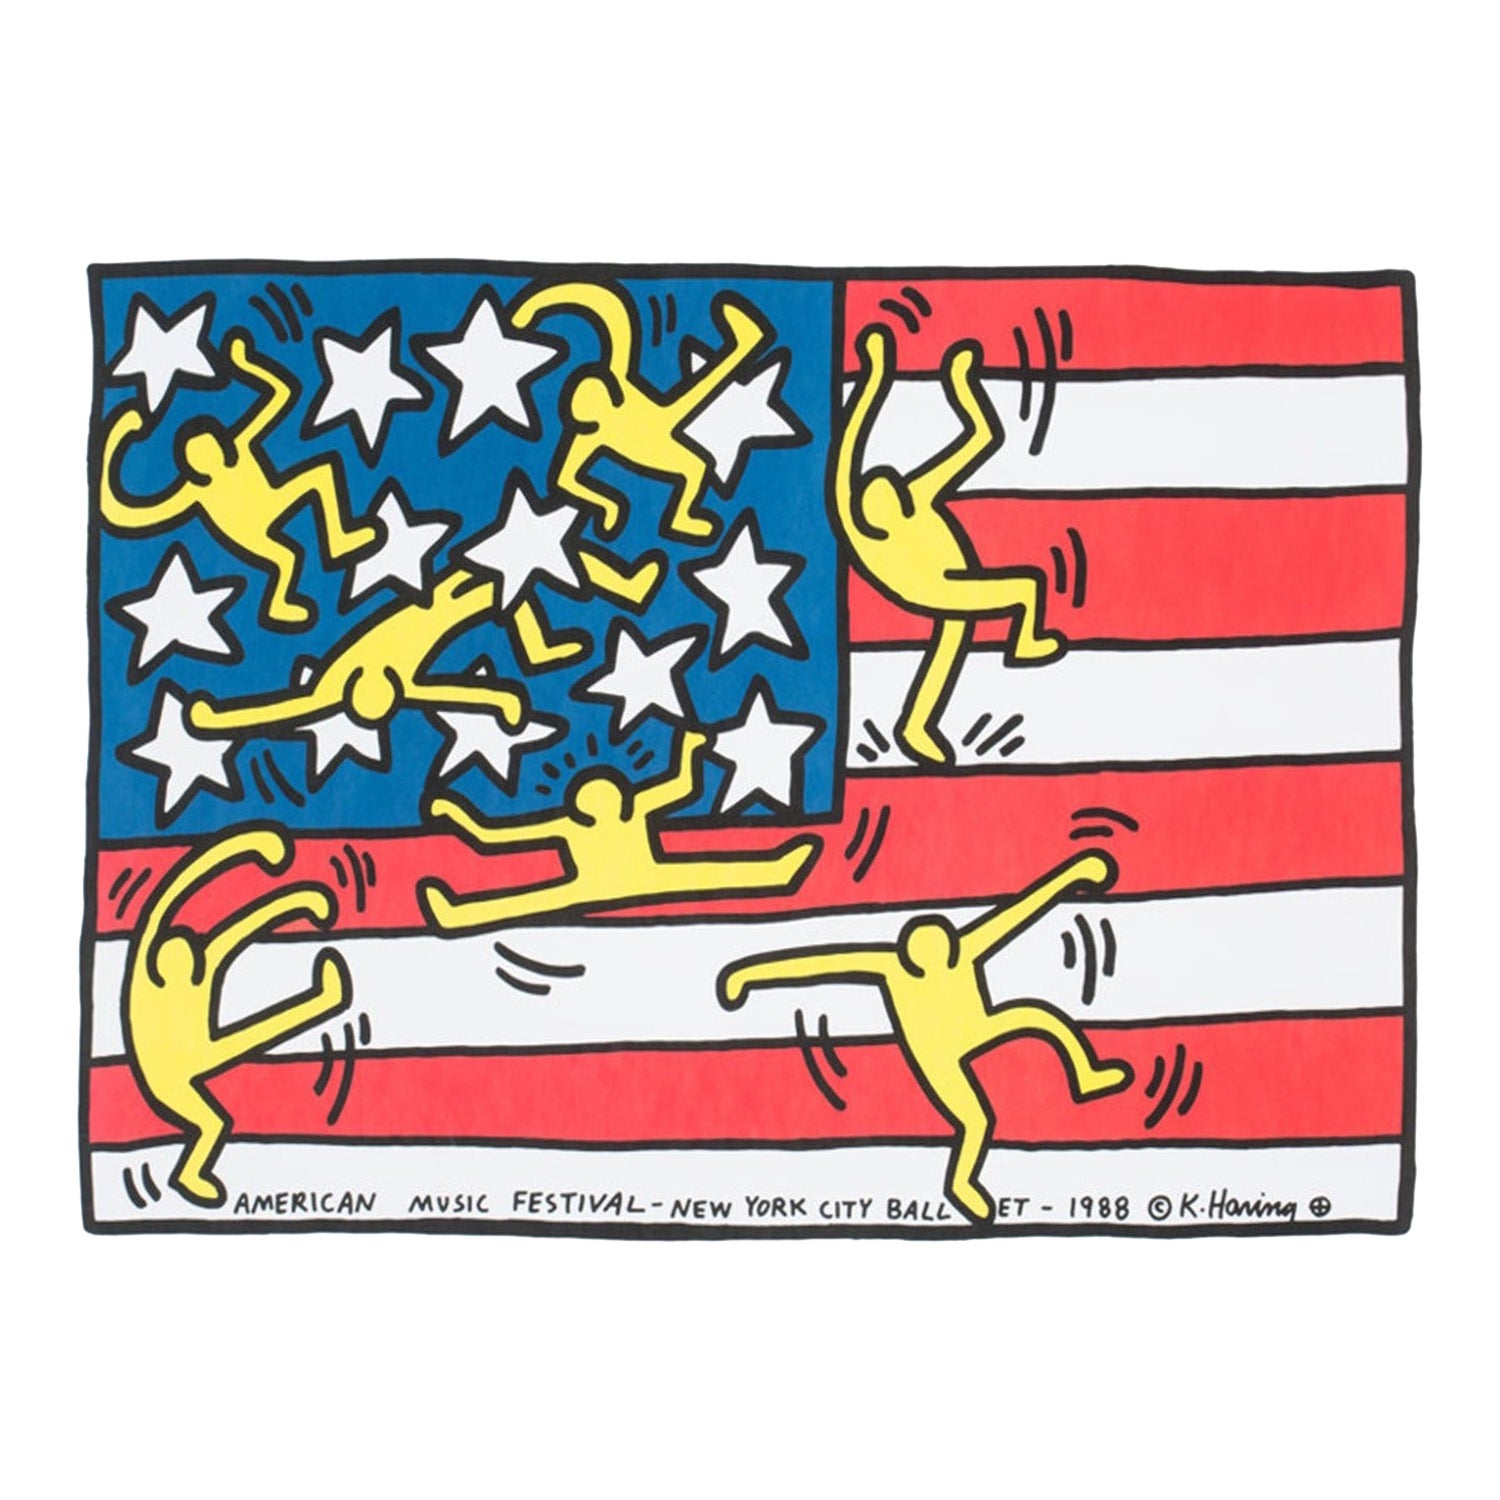 Affiche vintage originale Keith Haring - American Music Festival - NYC Ballet 1988